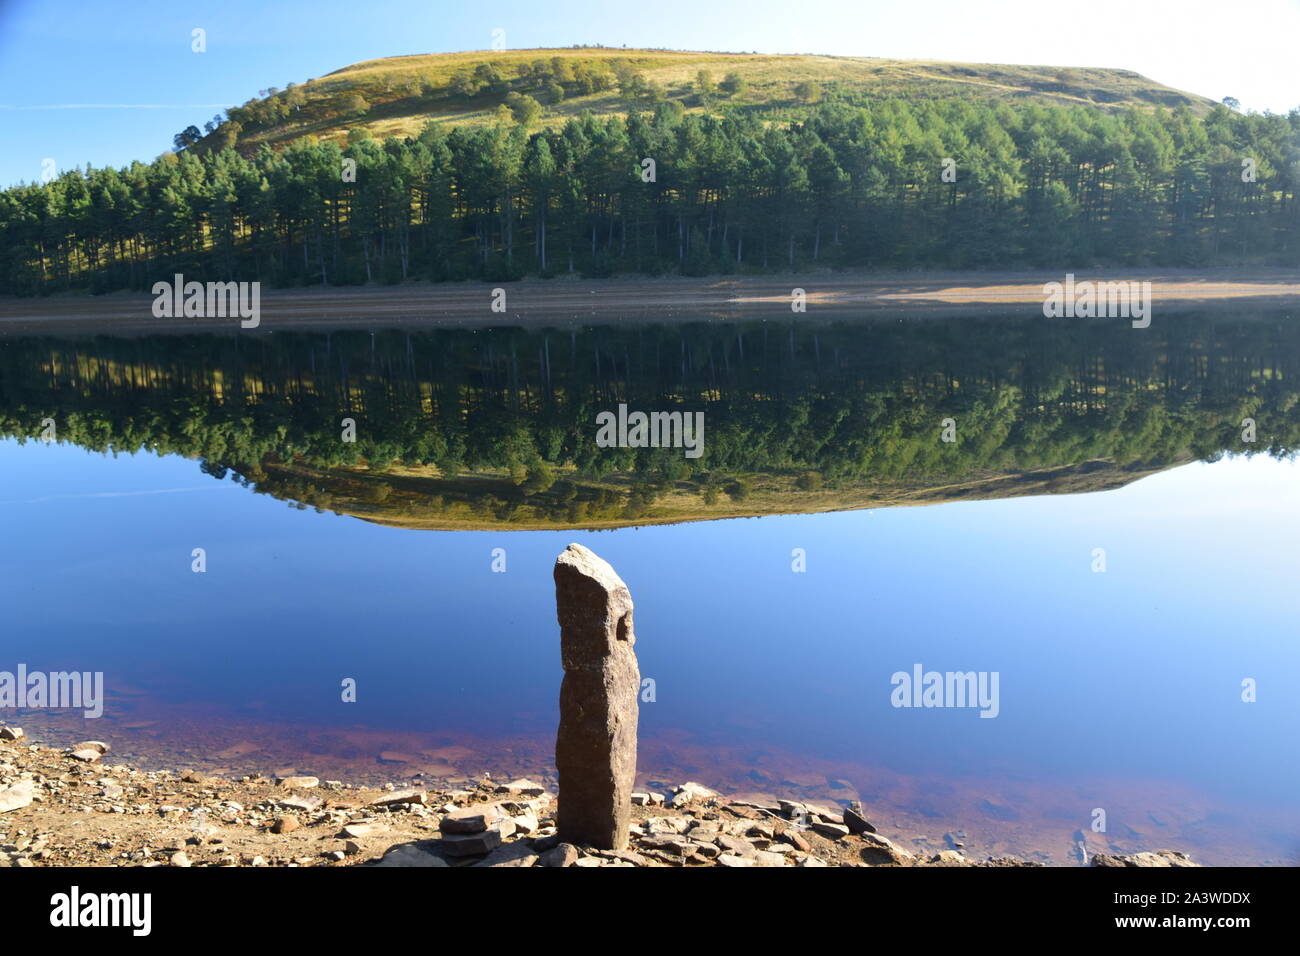 Howden reservoir Derbyshire, mid summer showing mirror like water surface with amazing reflections of opposite shore. Stock Photo